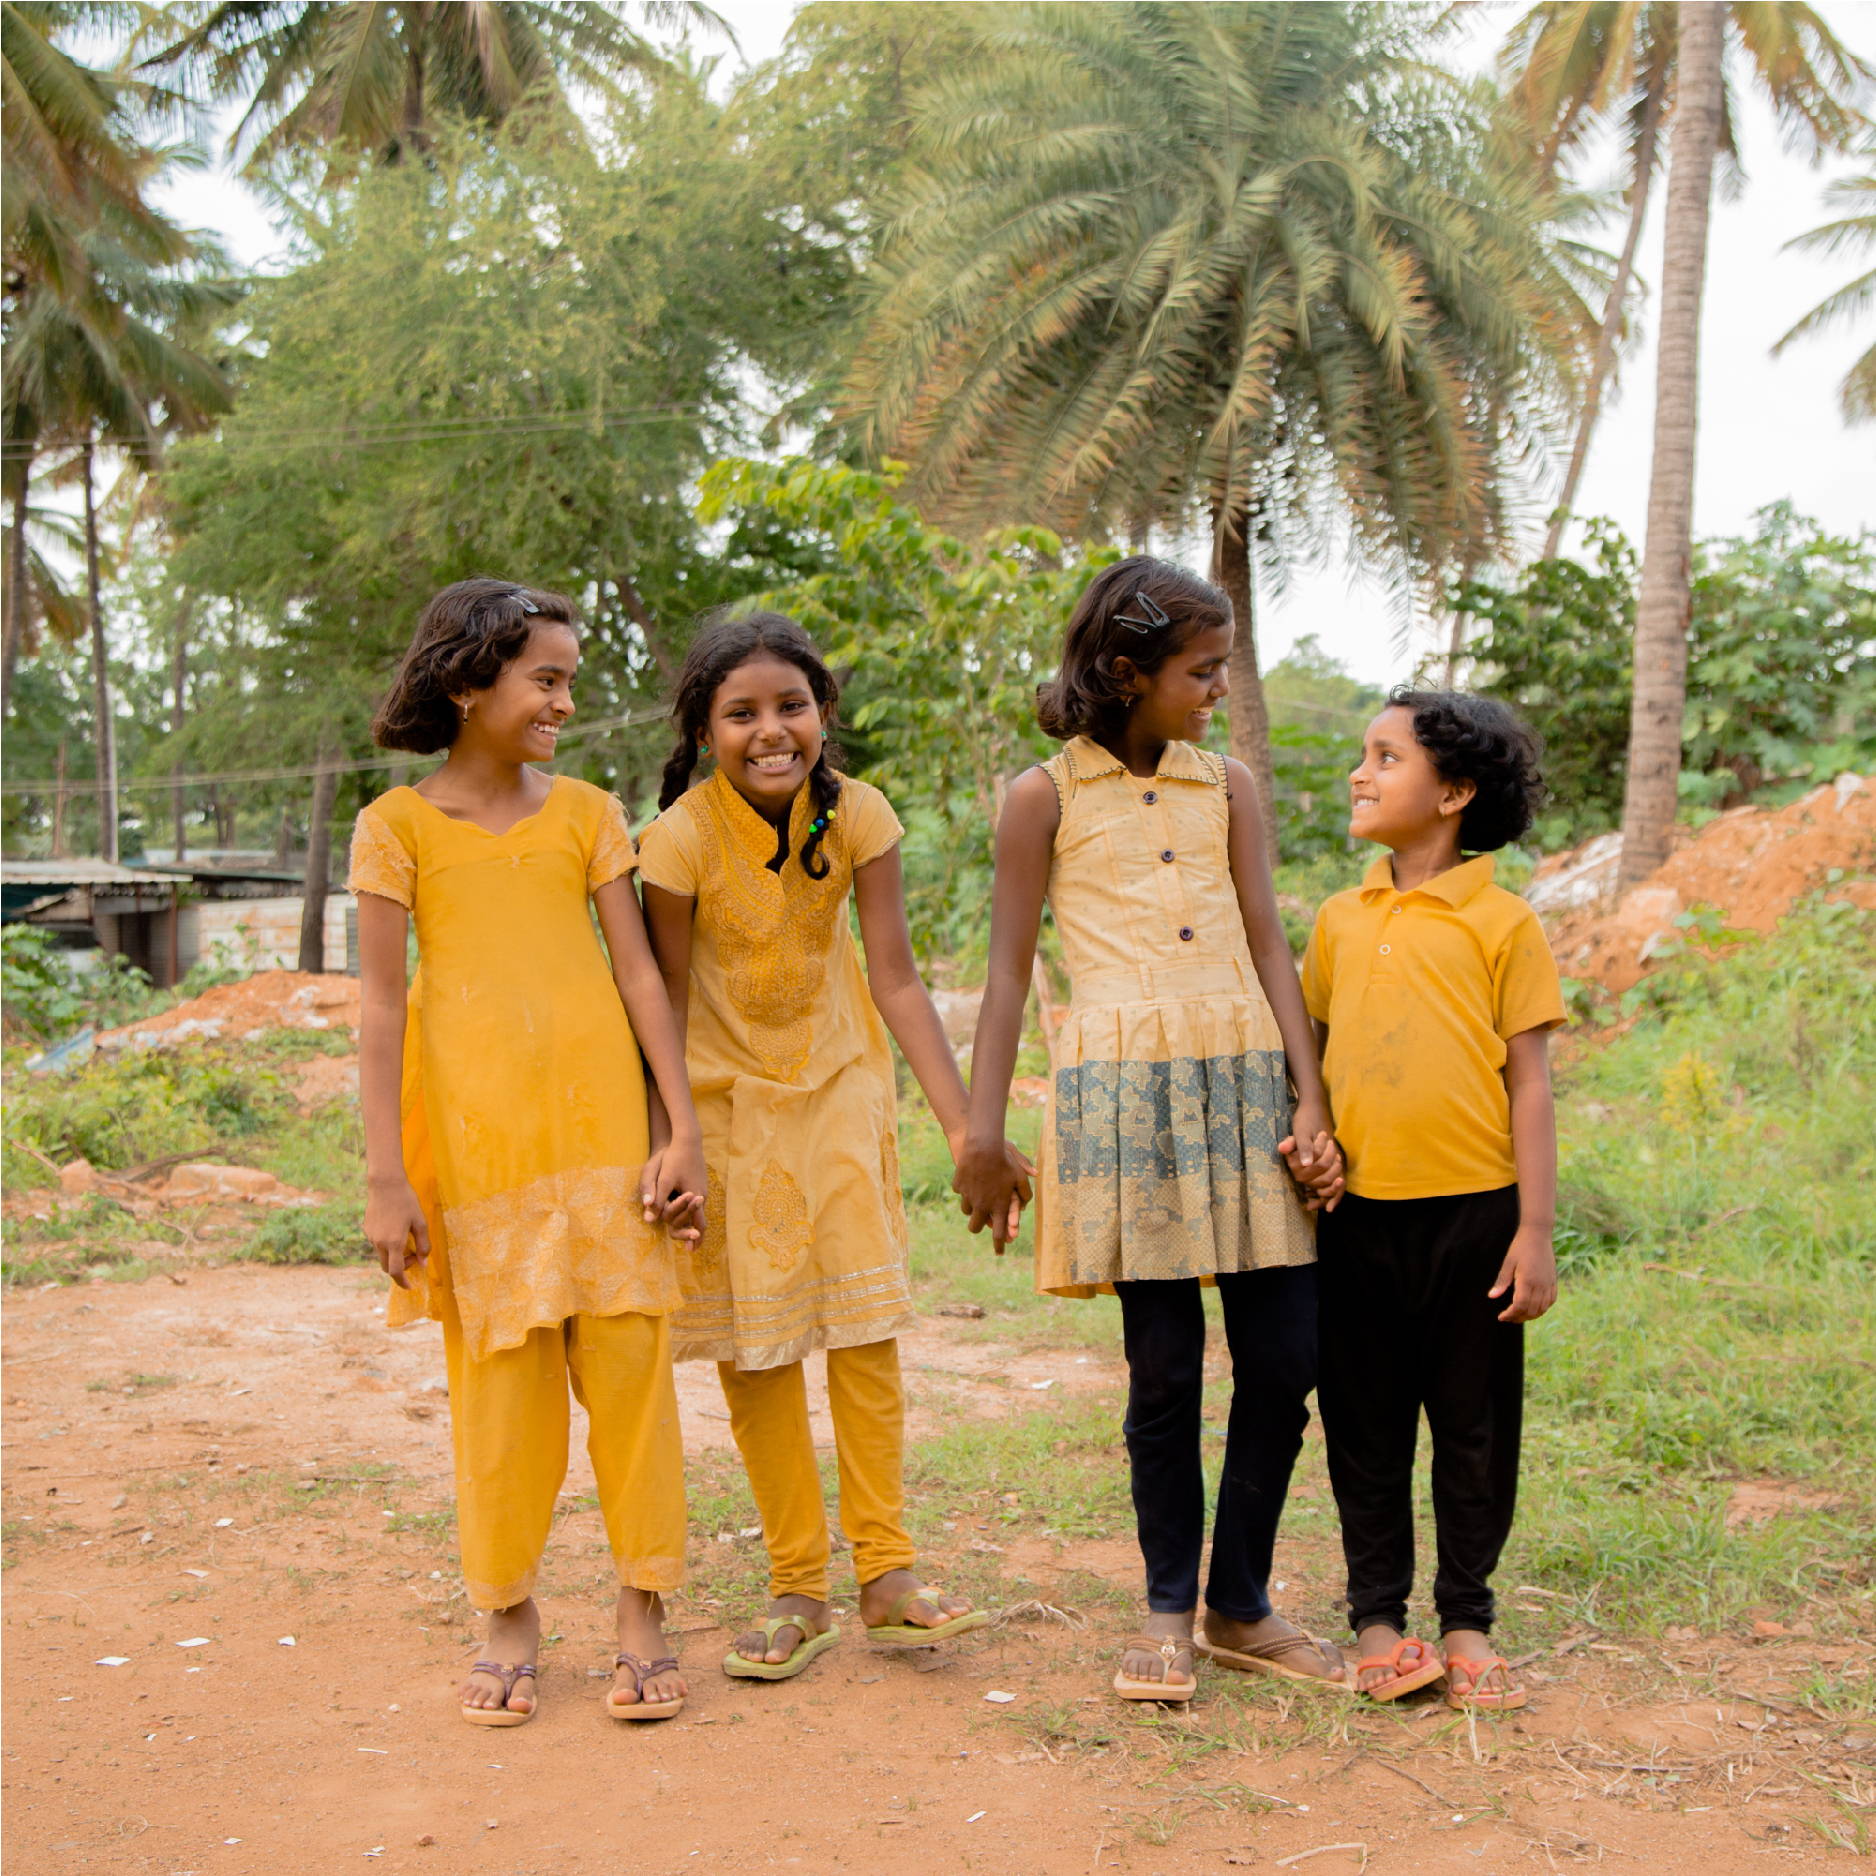 3 young Indian girls, hold hands while smiling, laughing, and looking at each other. They are all wearing yellow dresses.